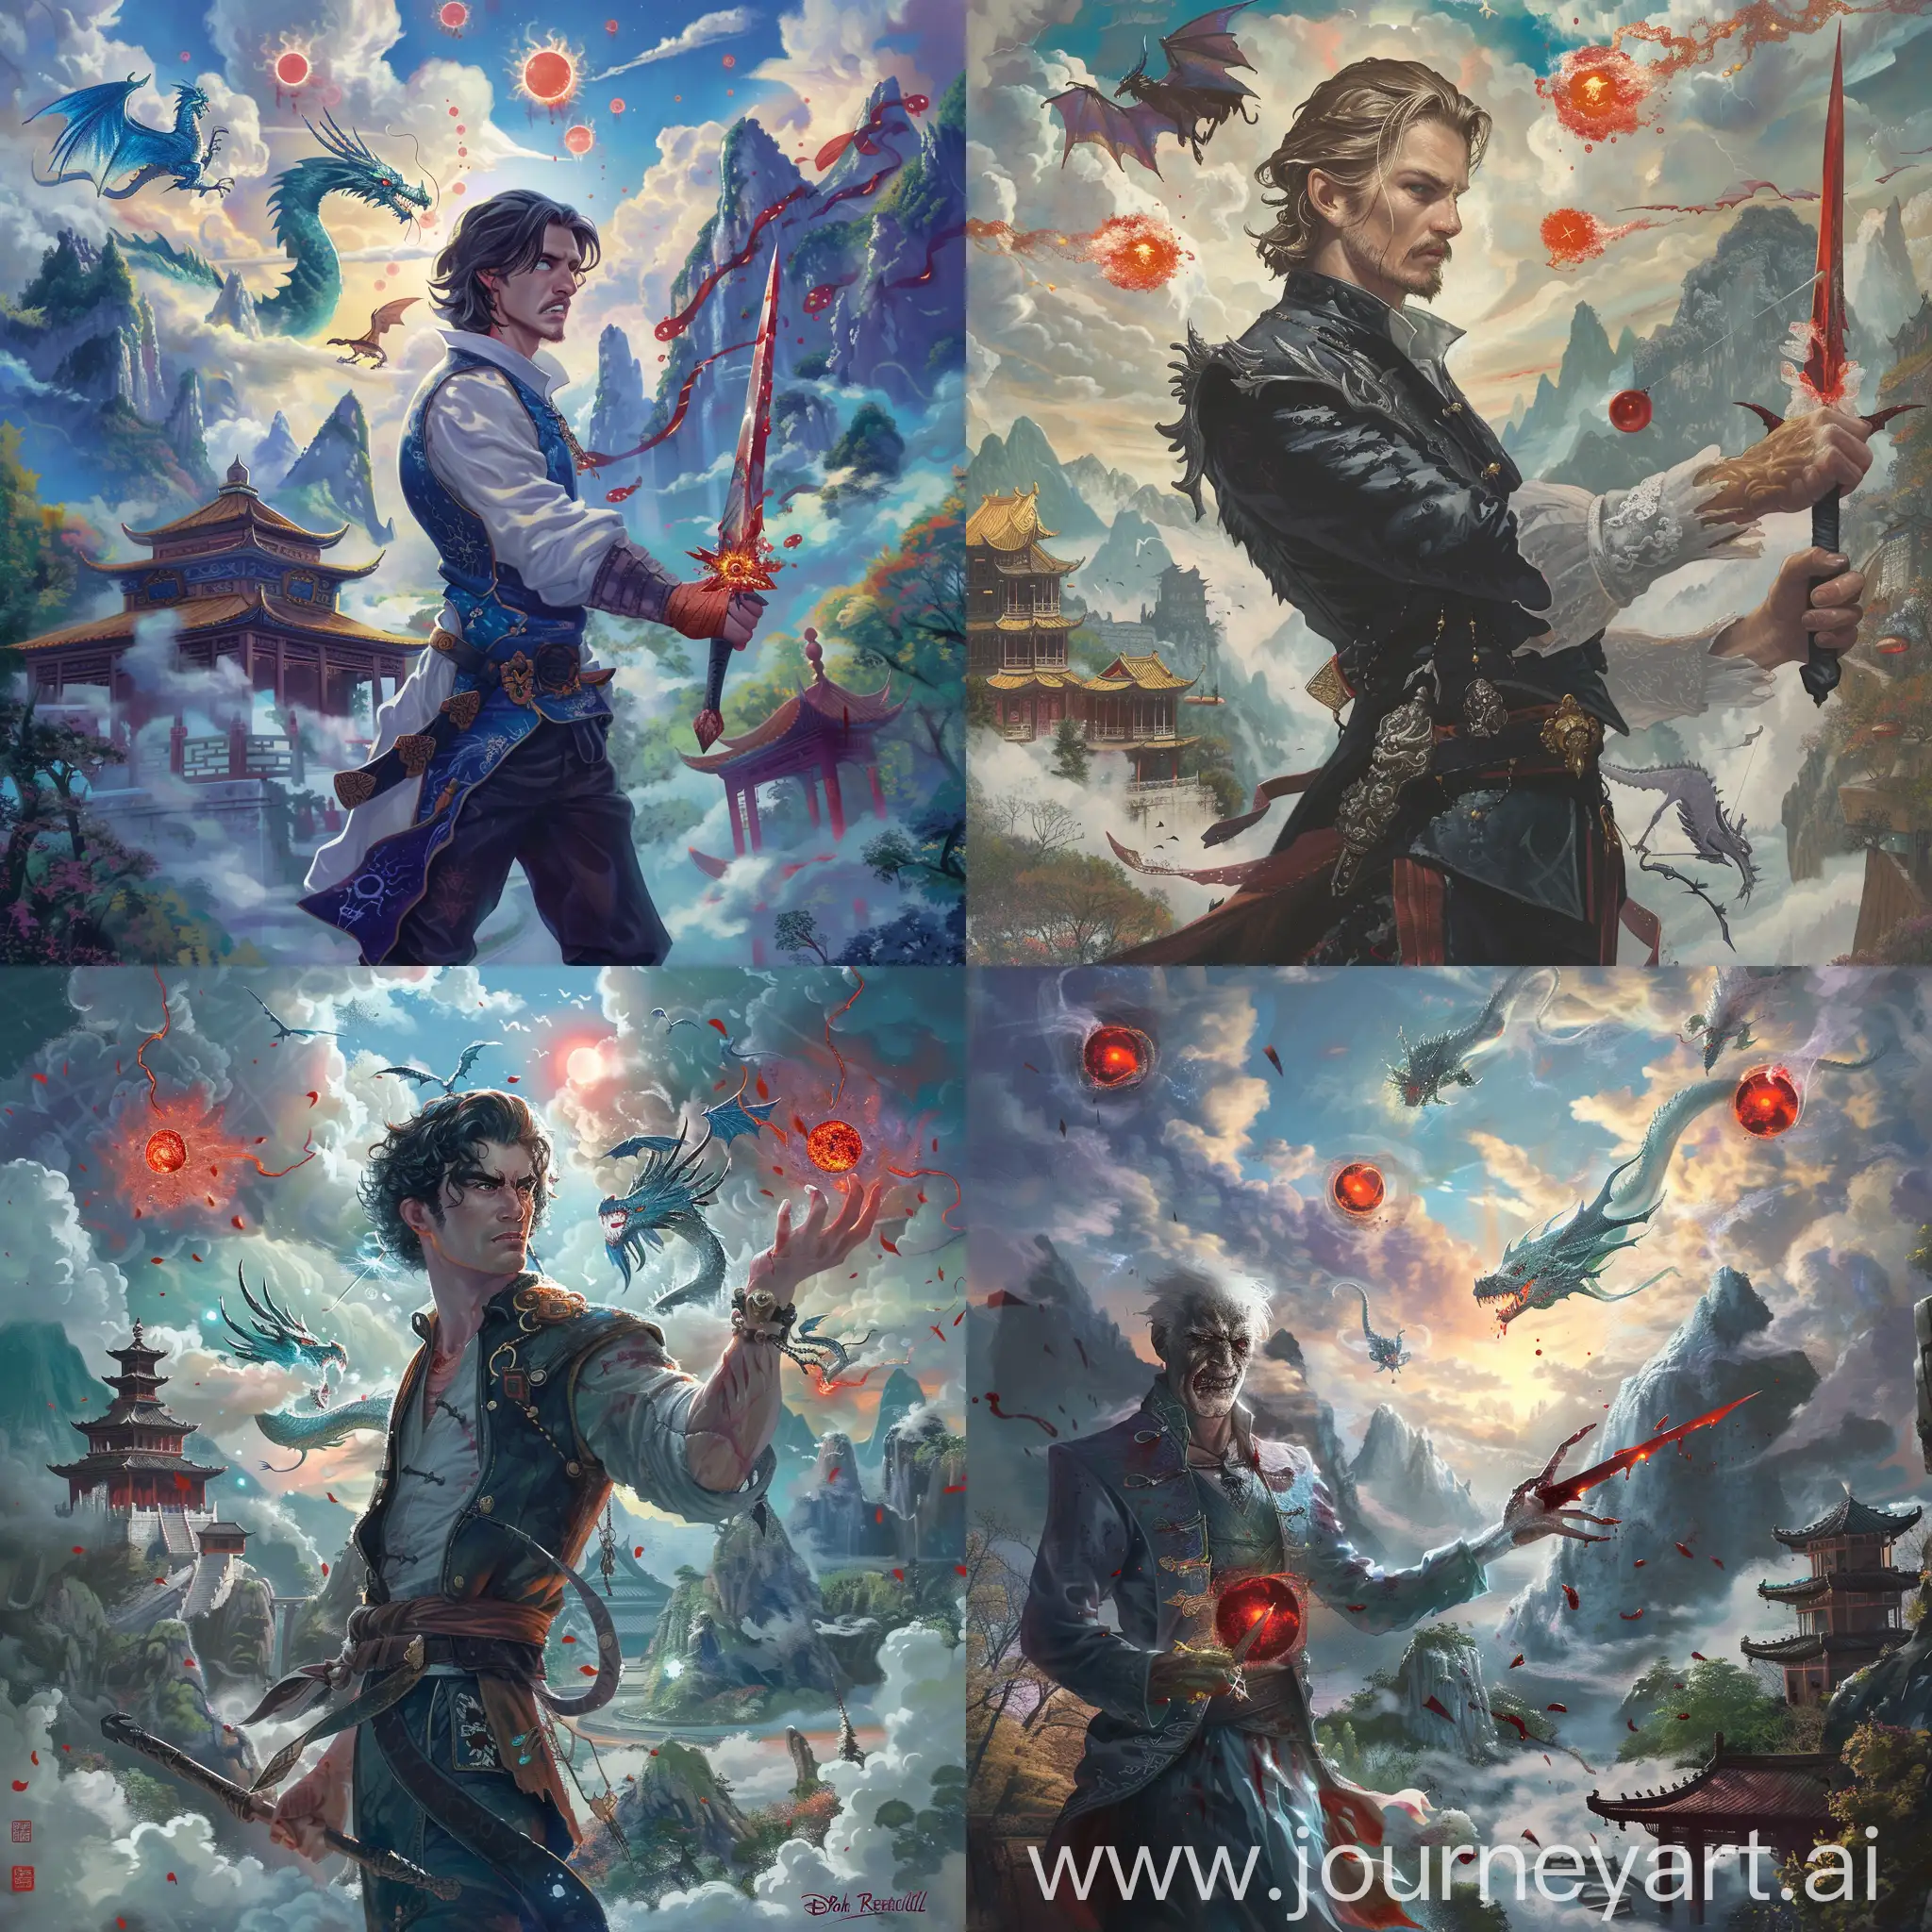 Historic painting style:

a Disney Villain, John Ratcliffe, he holds a medieval Chinese style blade in right hand, 

Chinese Guilin mountains and temple as background,  evil iced dragons and three small red blood suns in cloudy sky.